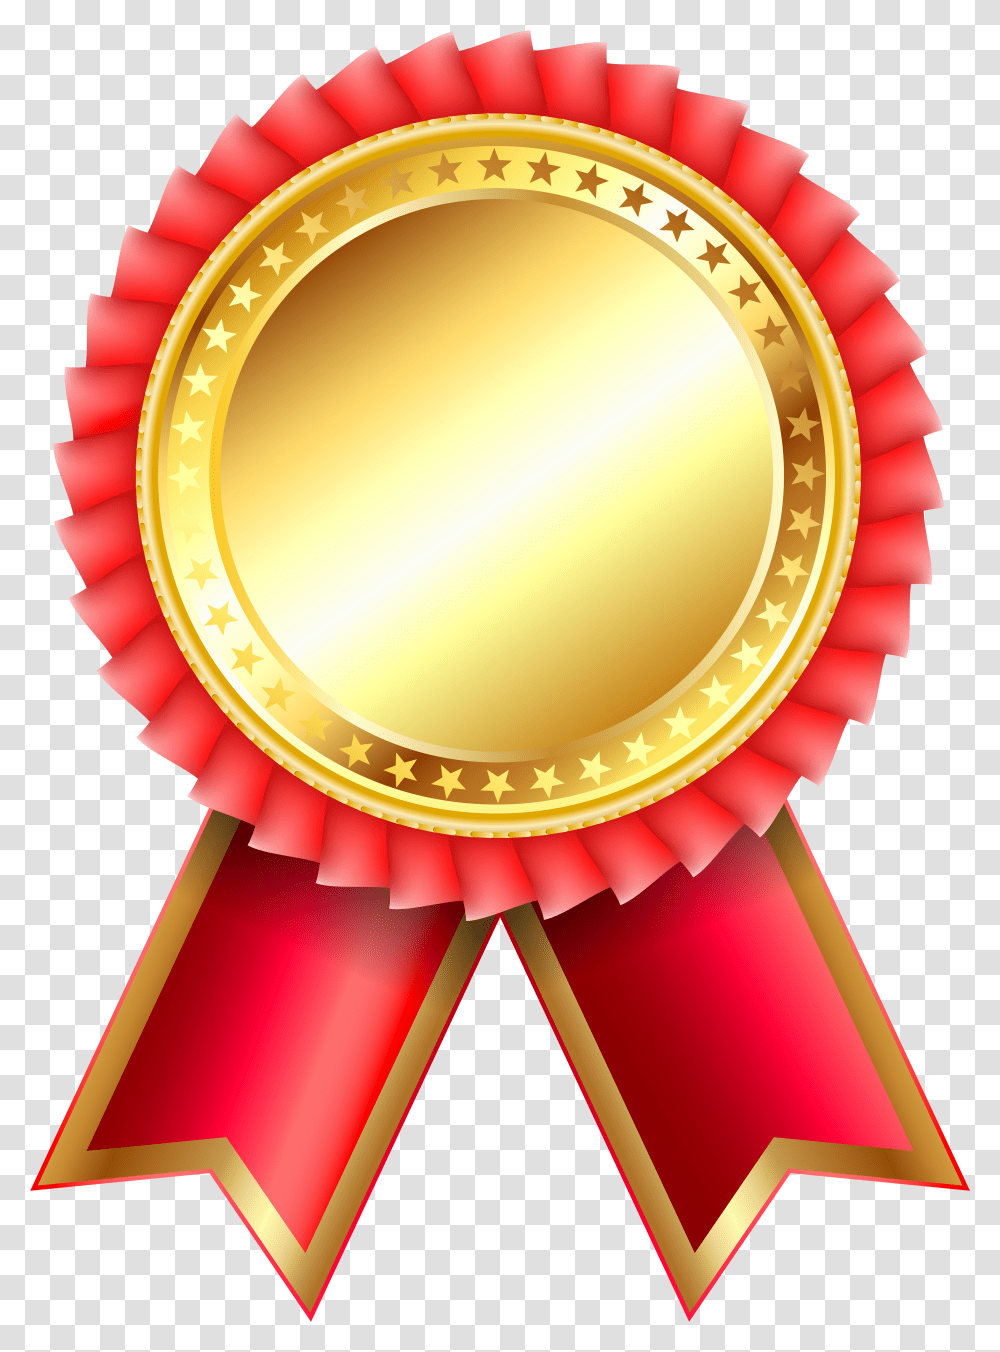 Winner Ribbon Free Cut Out Images Background Award Ribbon Transparent Png